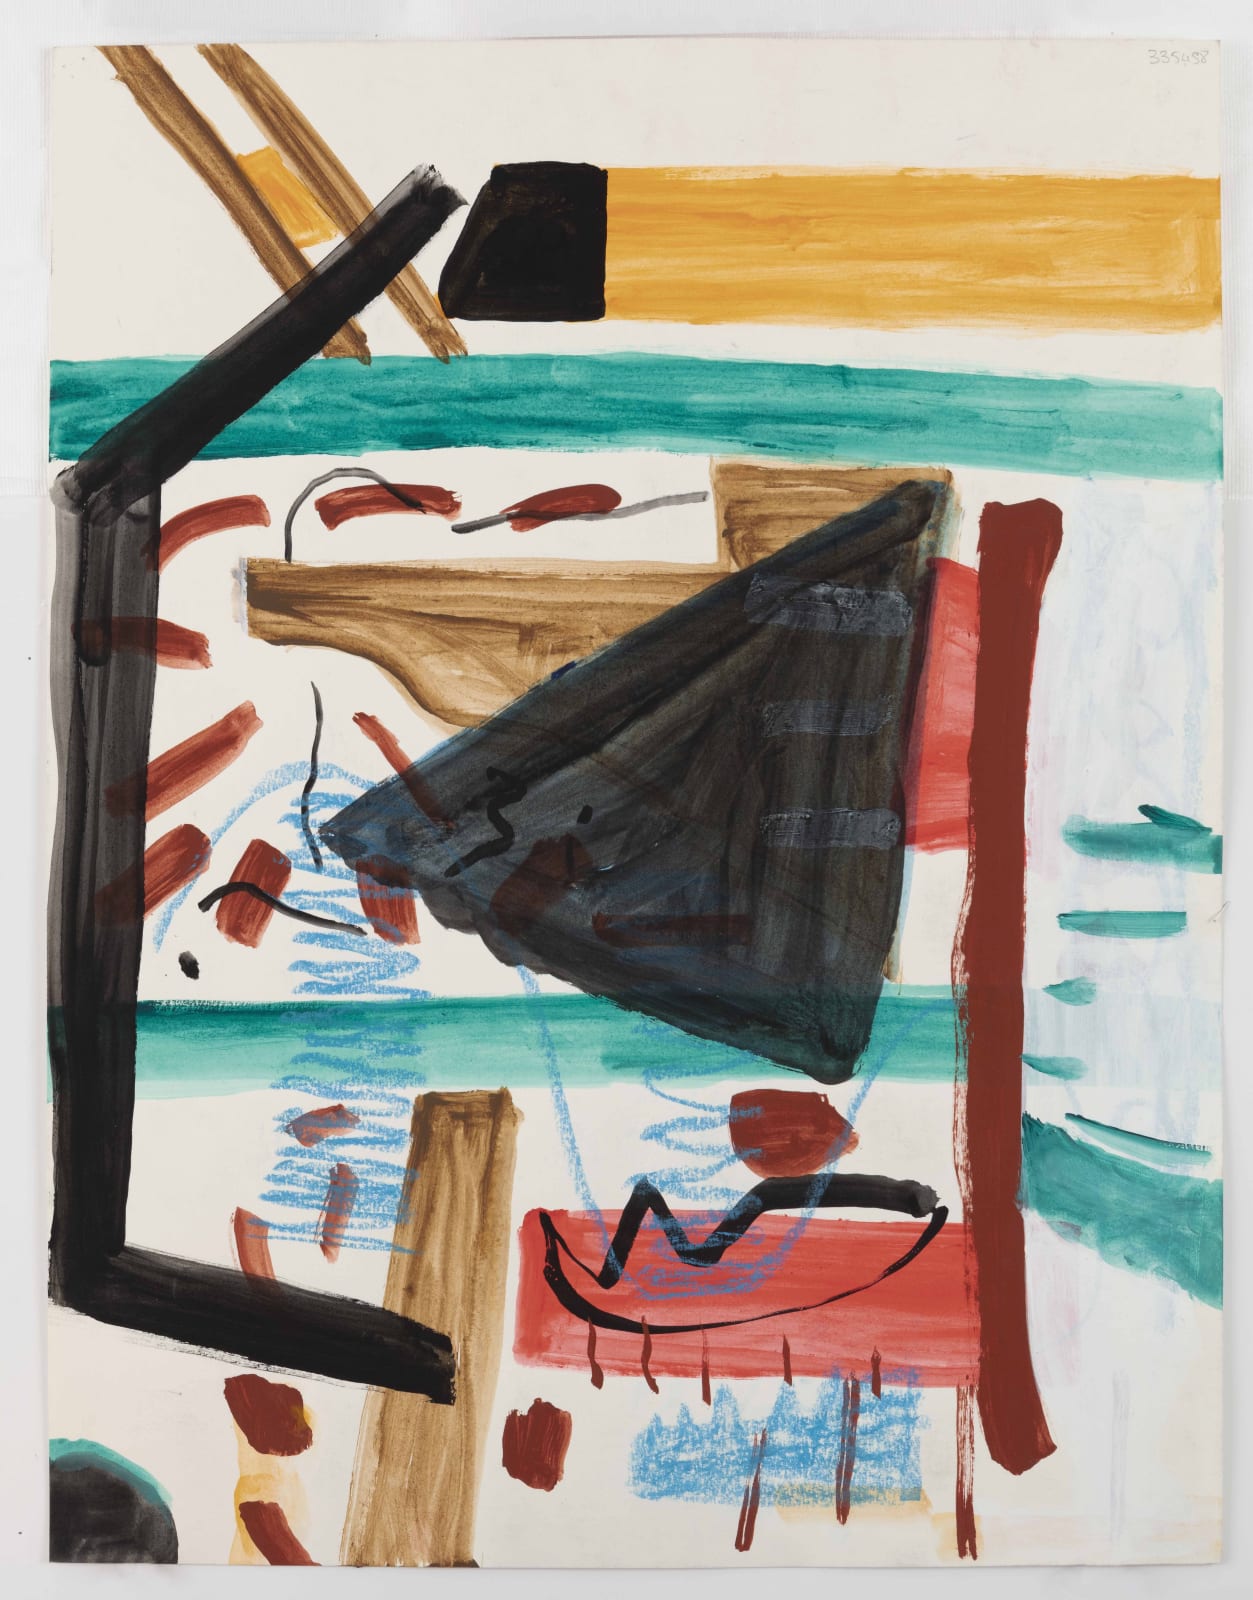 Shirley Jaffe Untitled, 1980 ca. Mixed media on paper 77 x 61 x 3,5 cm (30 5/16 x 24 1/32 x 1 3/8 in) framed